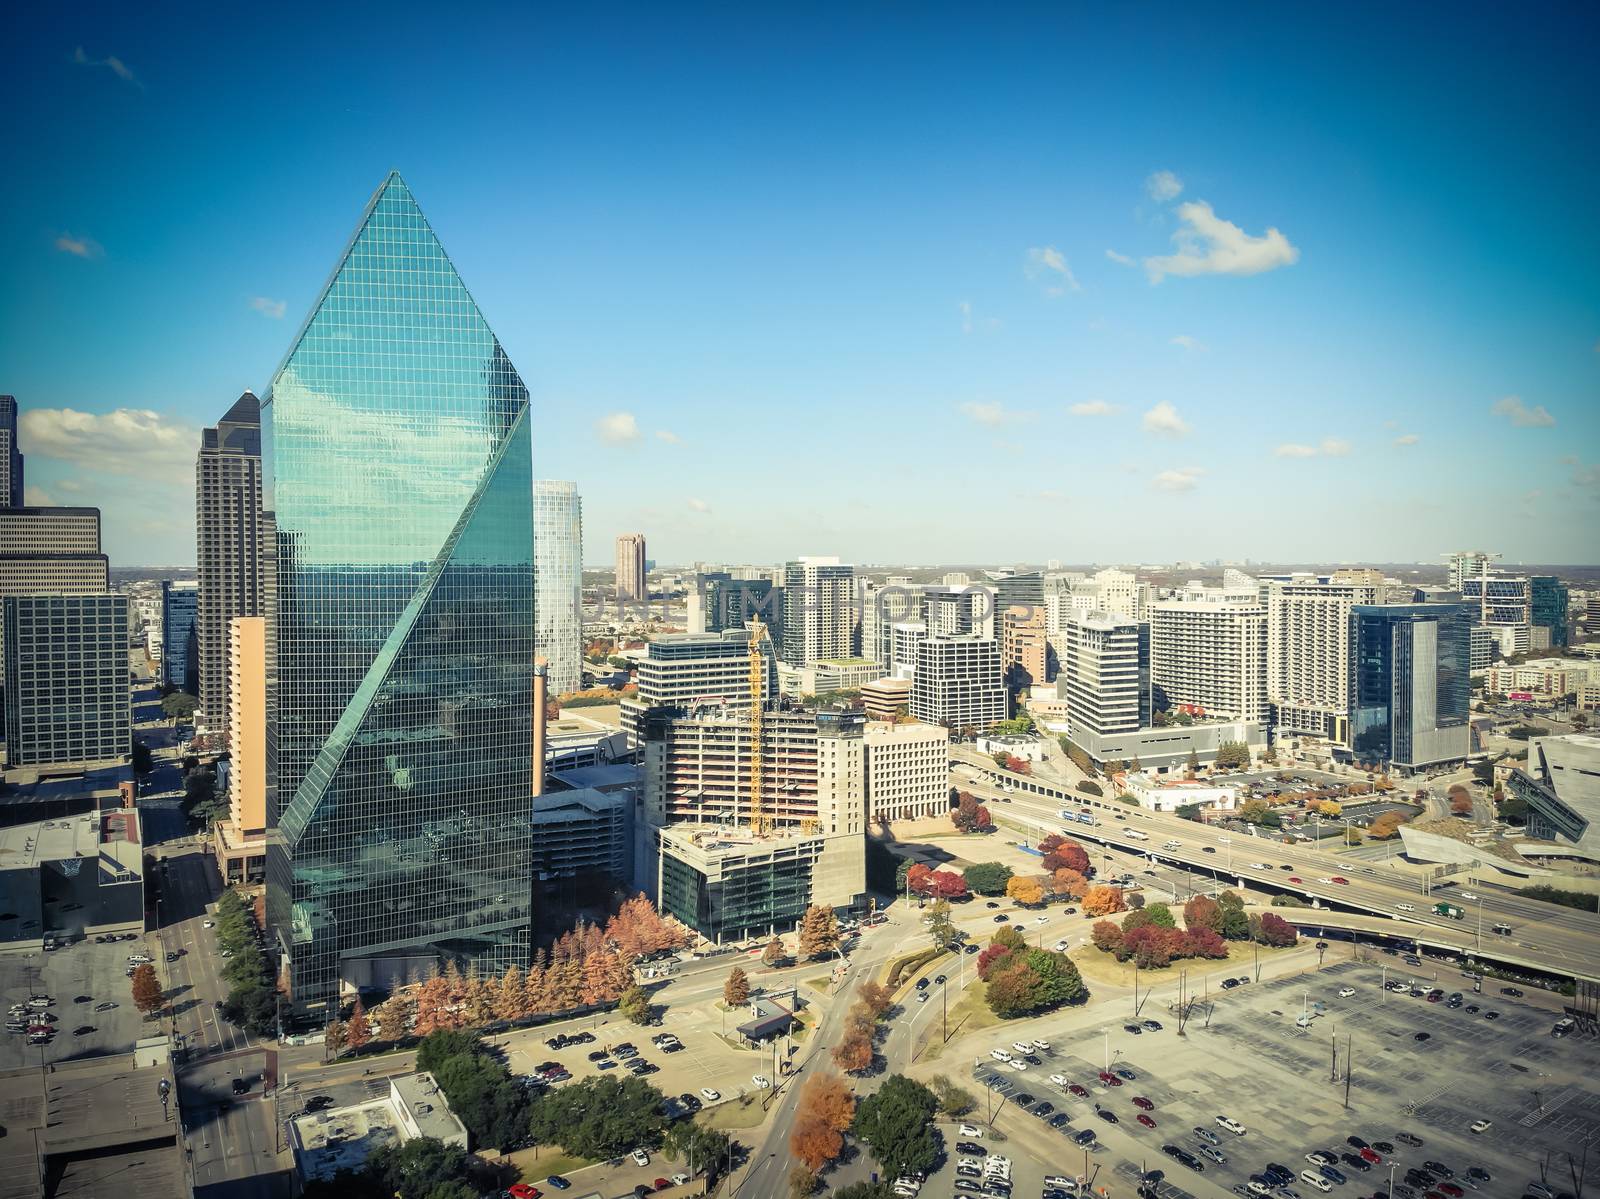 Aerial view of downtown Dallas, Texas during sunny autumn day with colorful fall foliages